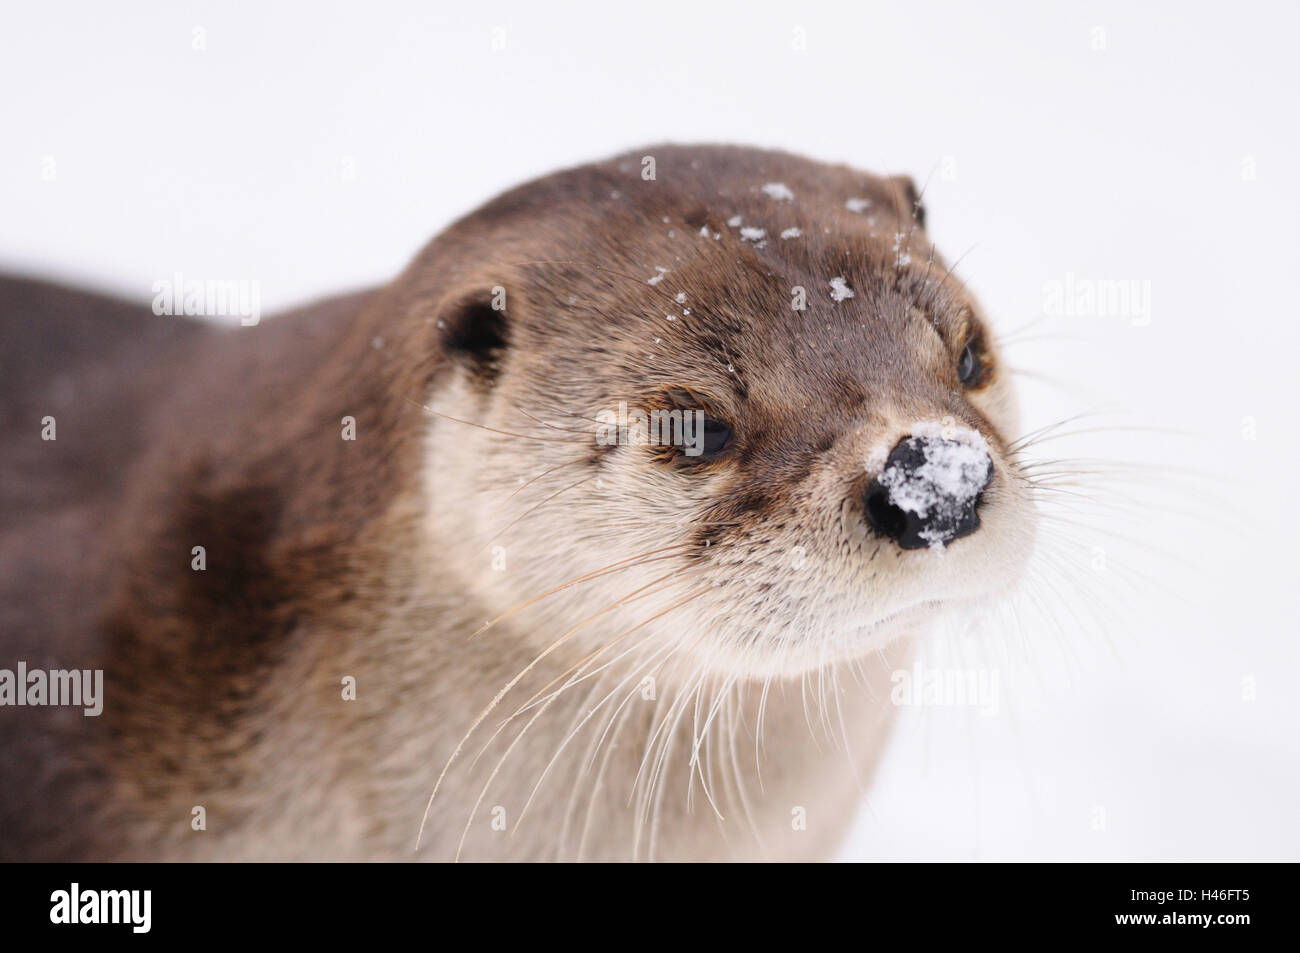 North American river otter, Lontra canadensis, portrait, Stock Photo